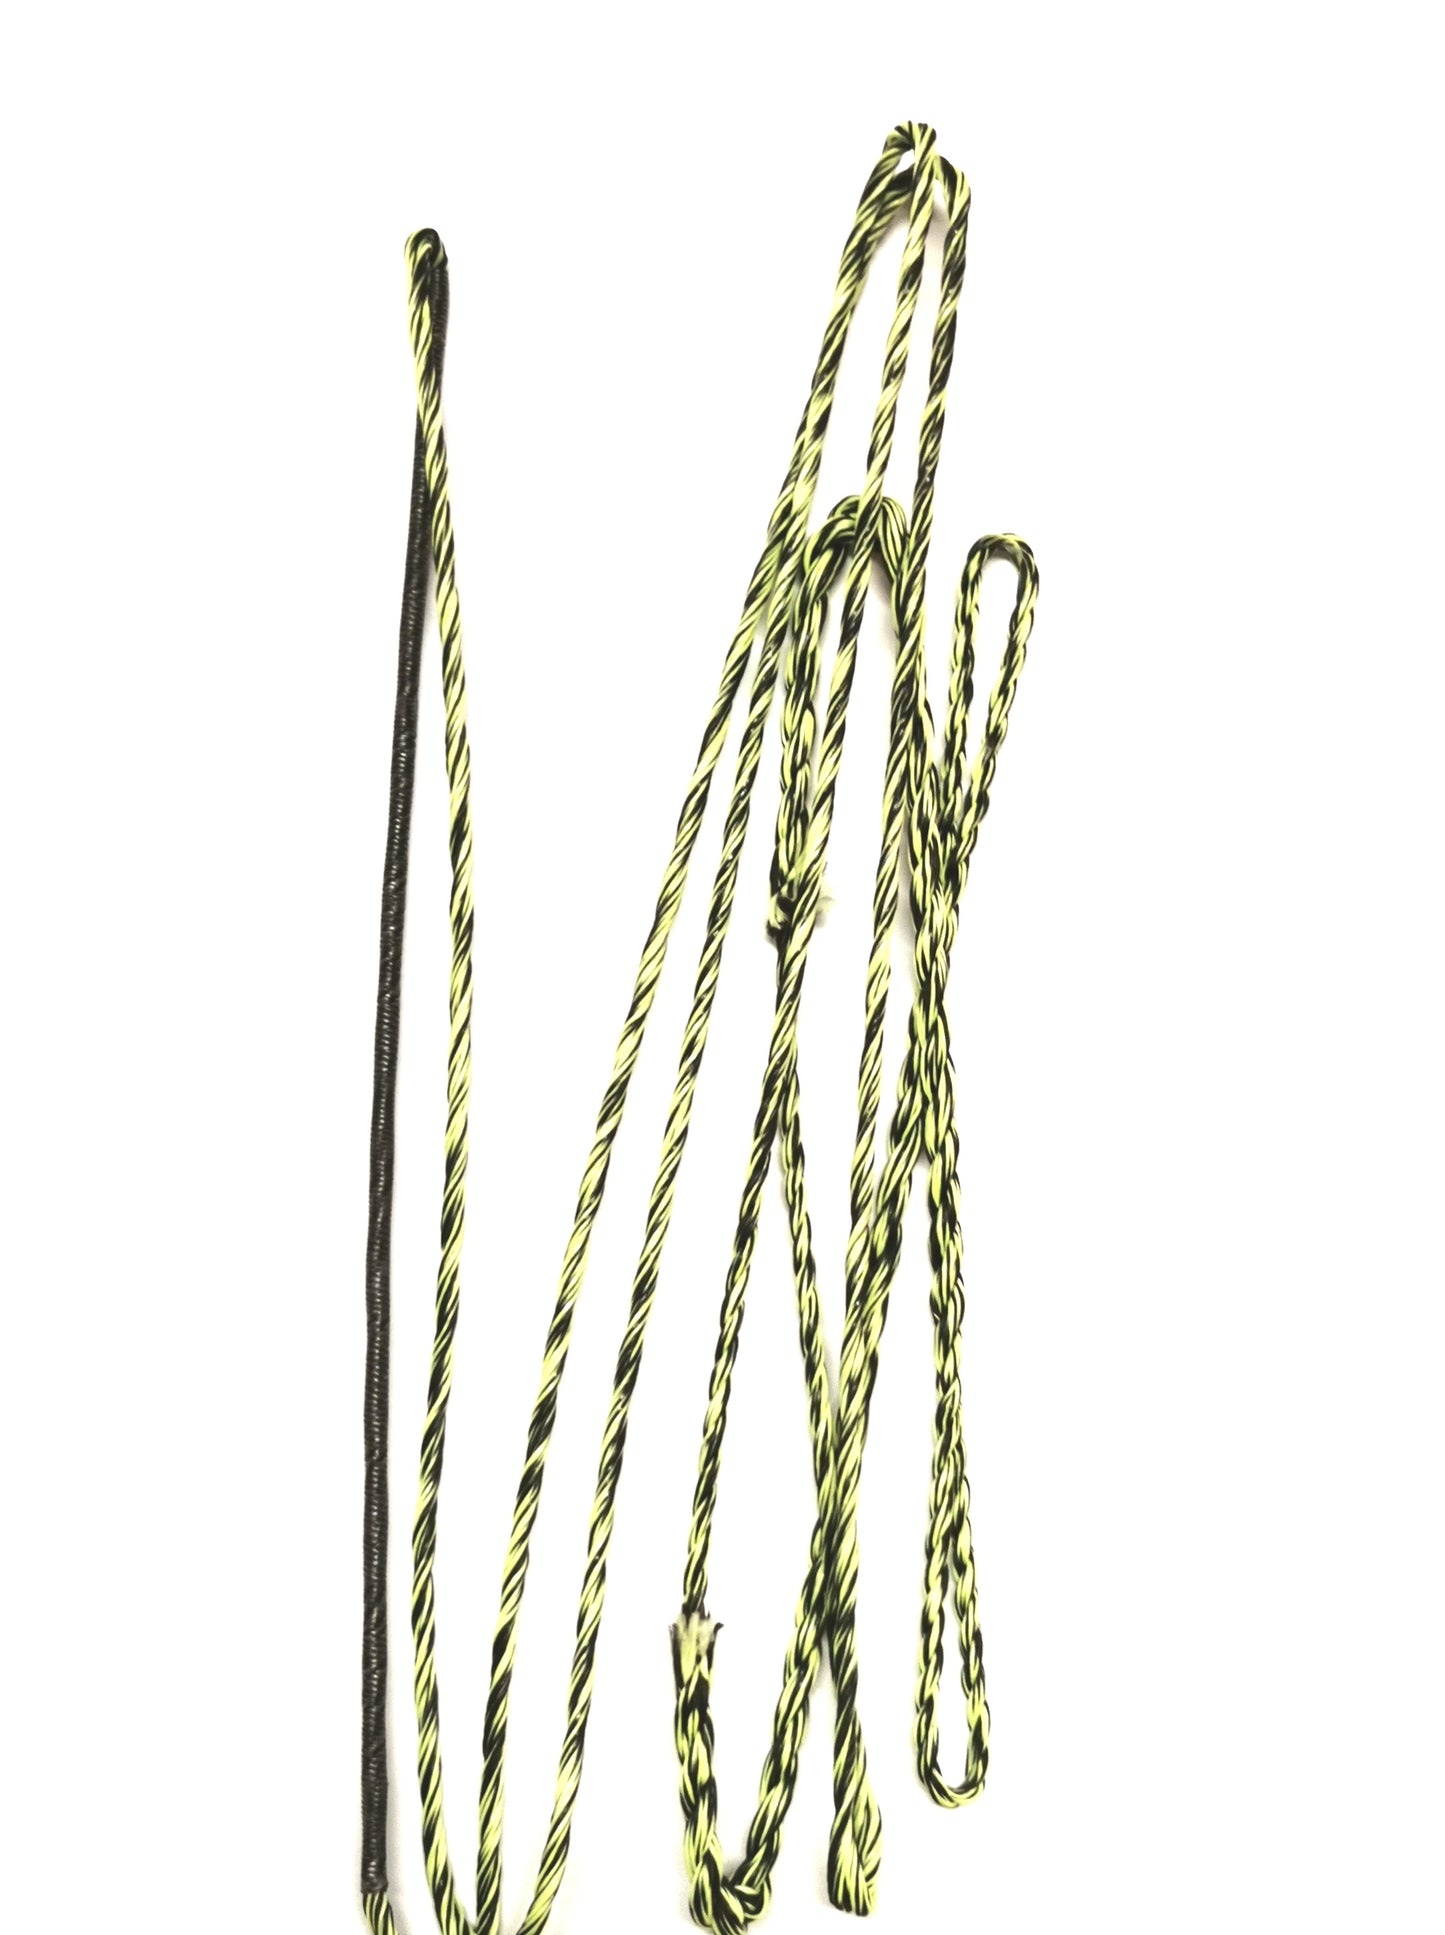 String Hybrid Carerra 99 Flemish for recurve bows, black/yellow-green flex 62-74 inches